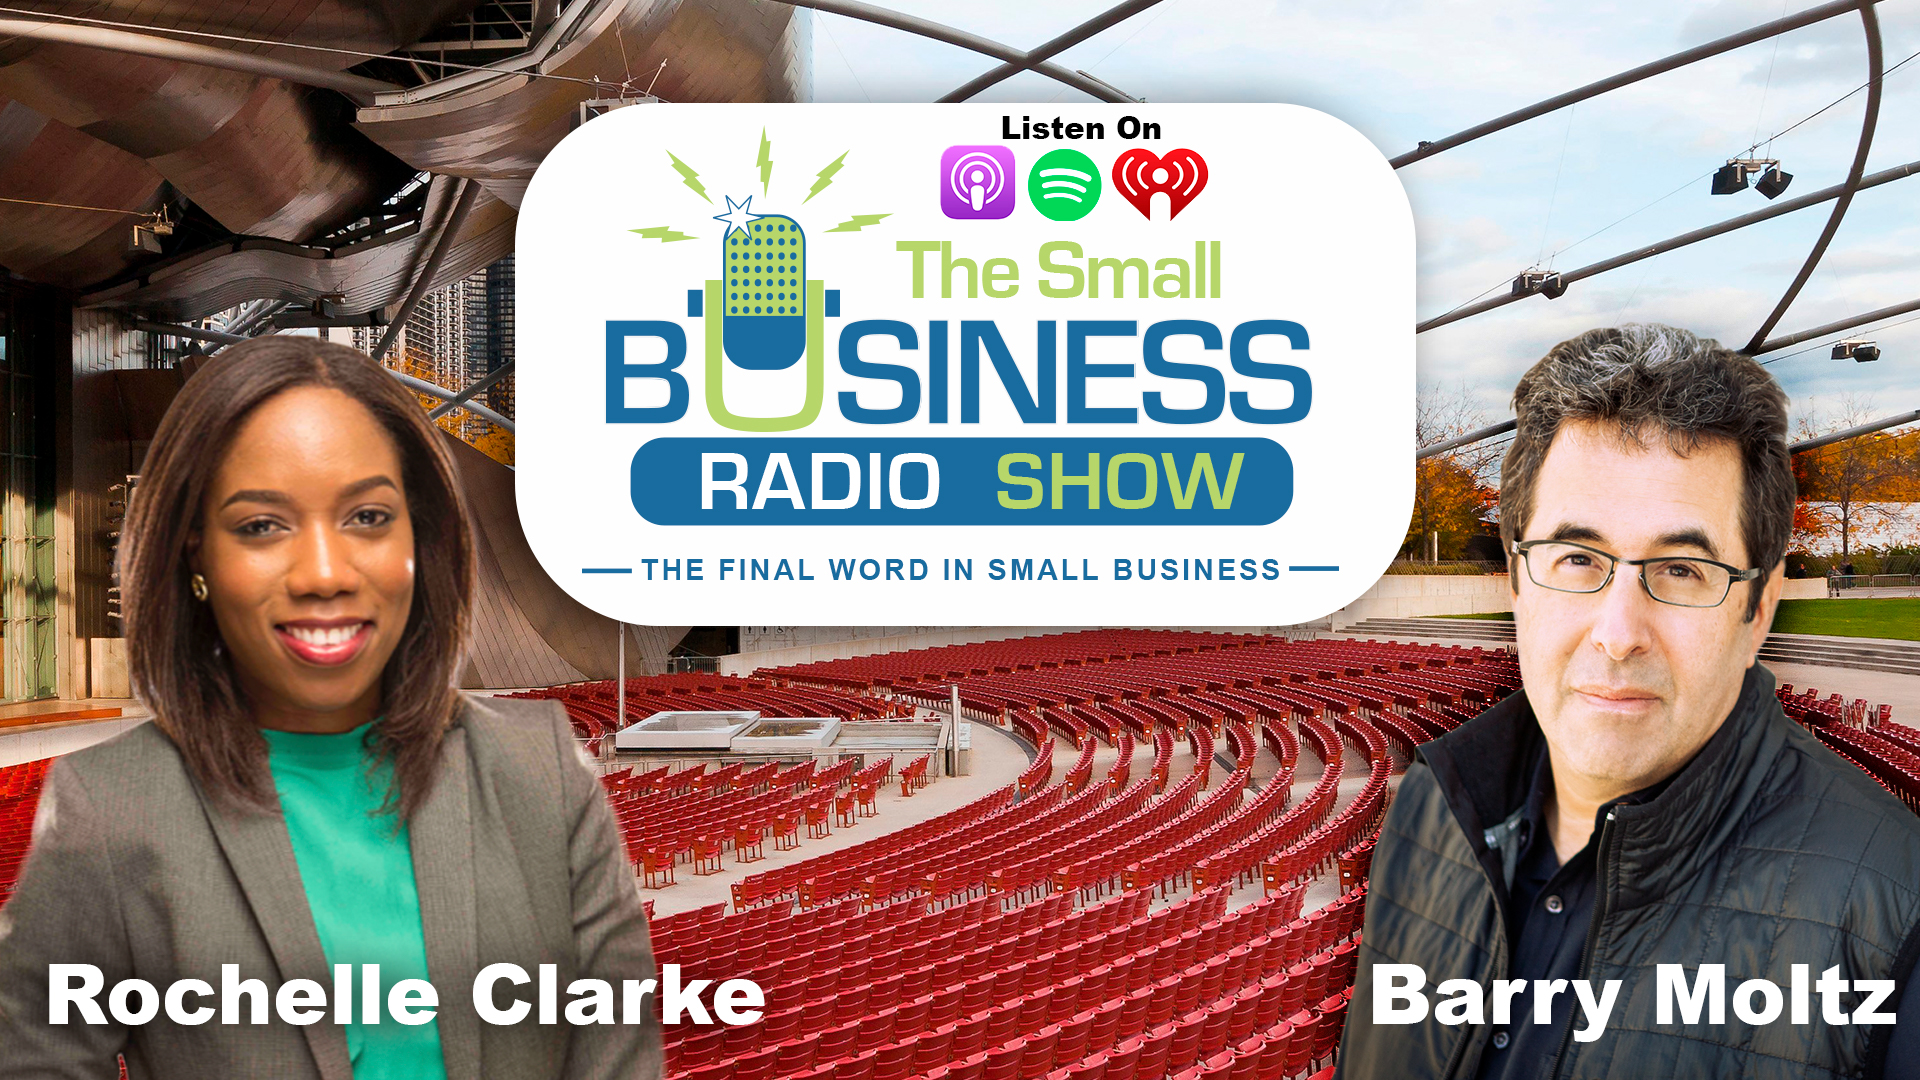 Rochelle Clarke on The Small Business Radio Show